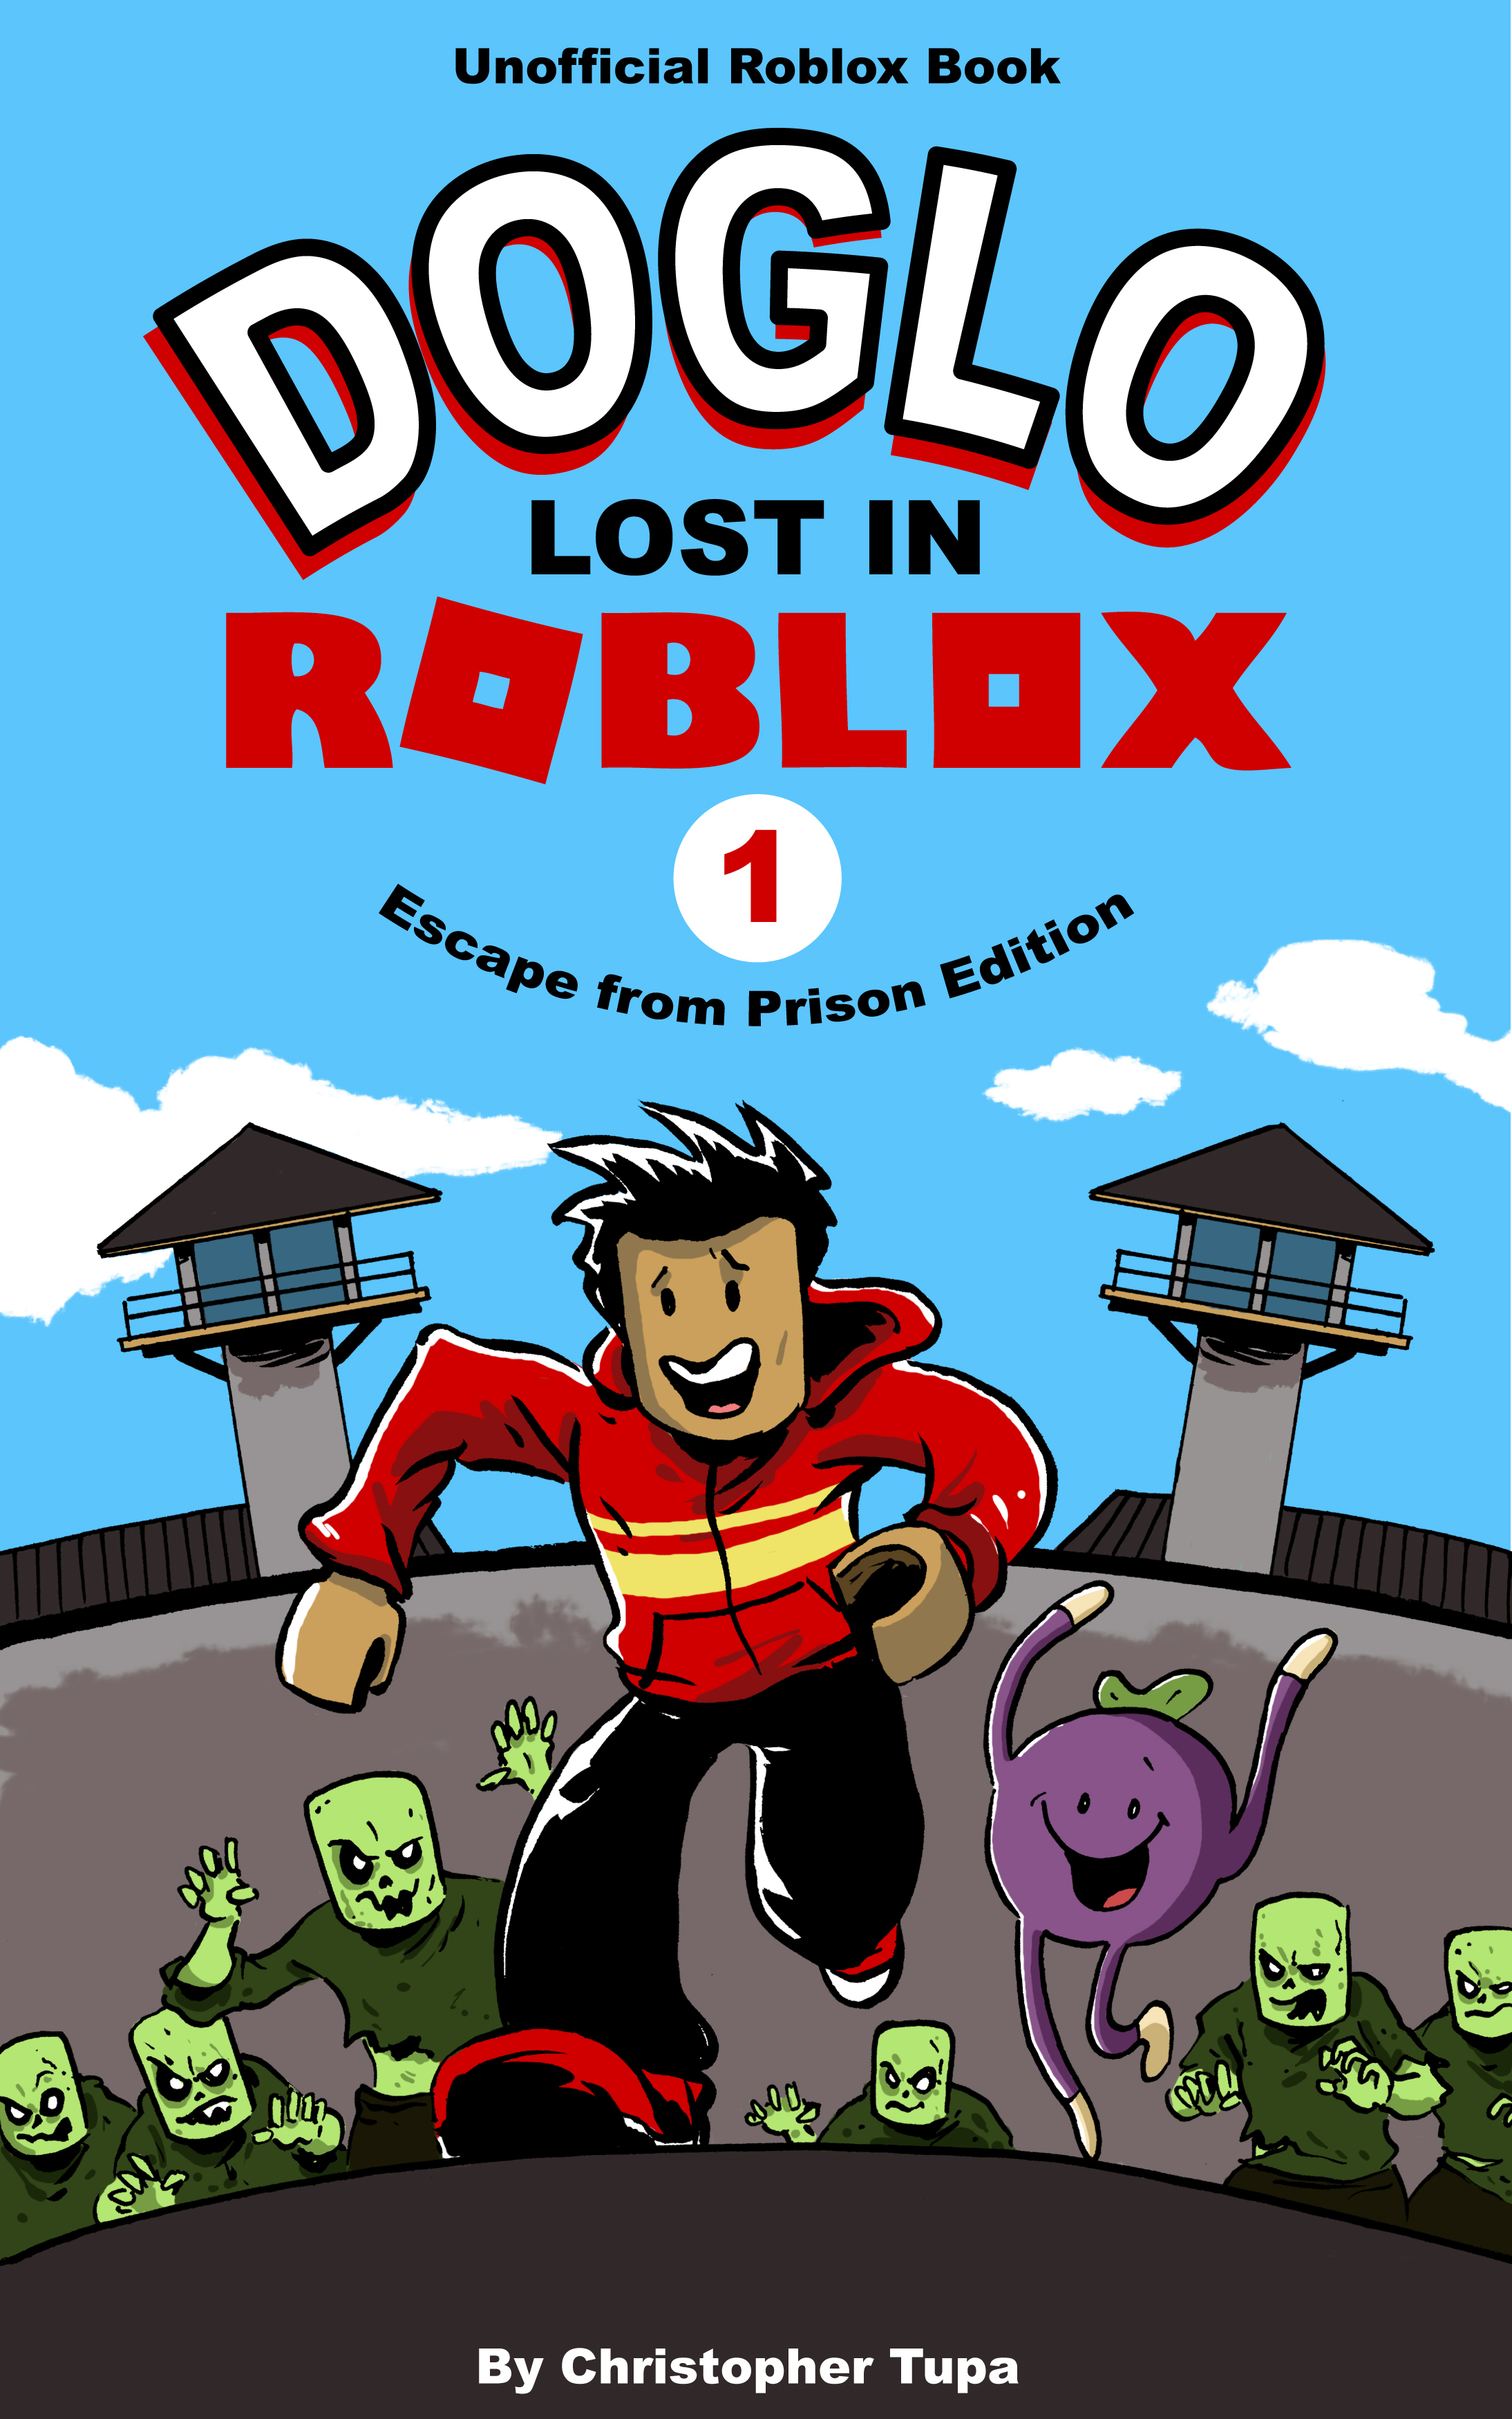 Doglo Lost In Roblox Escape From Prison Edition An Ebook By Christopher Tupa - roblox nudity